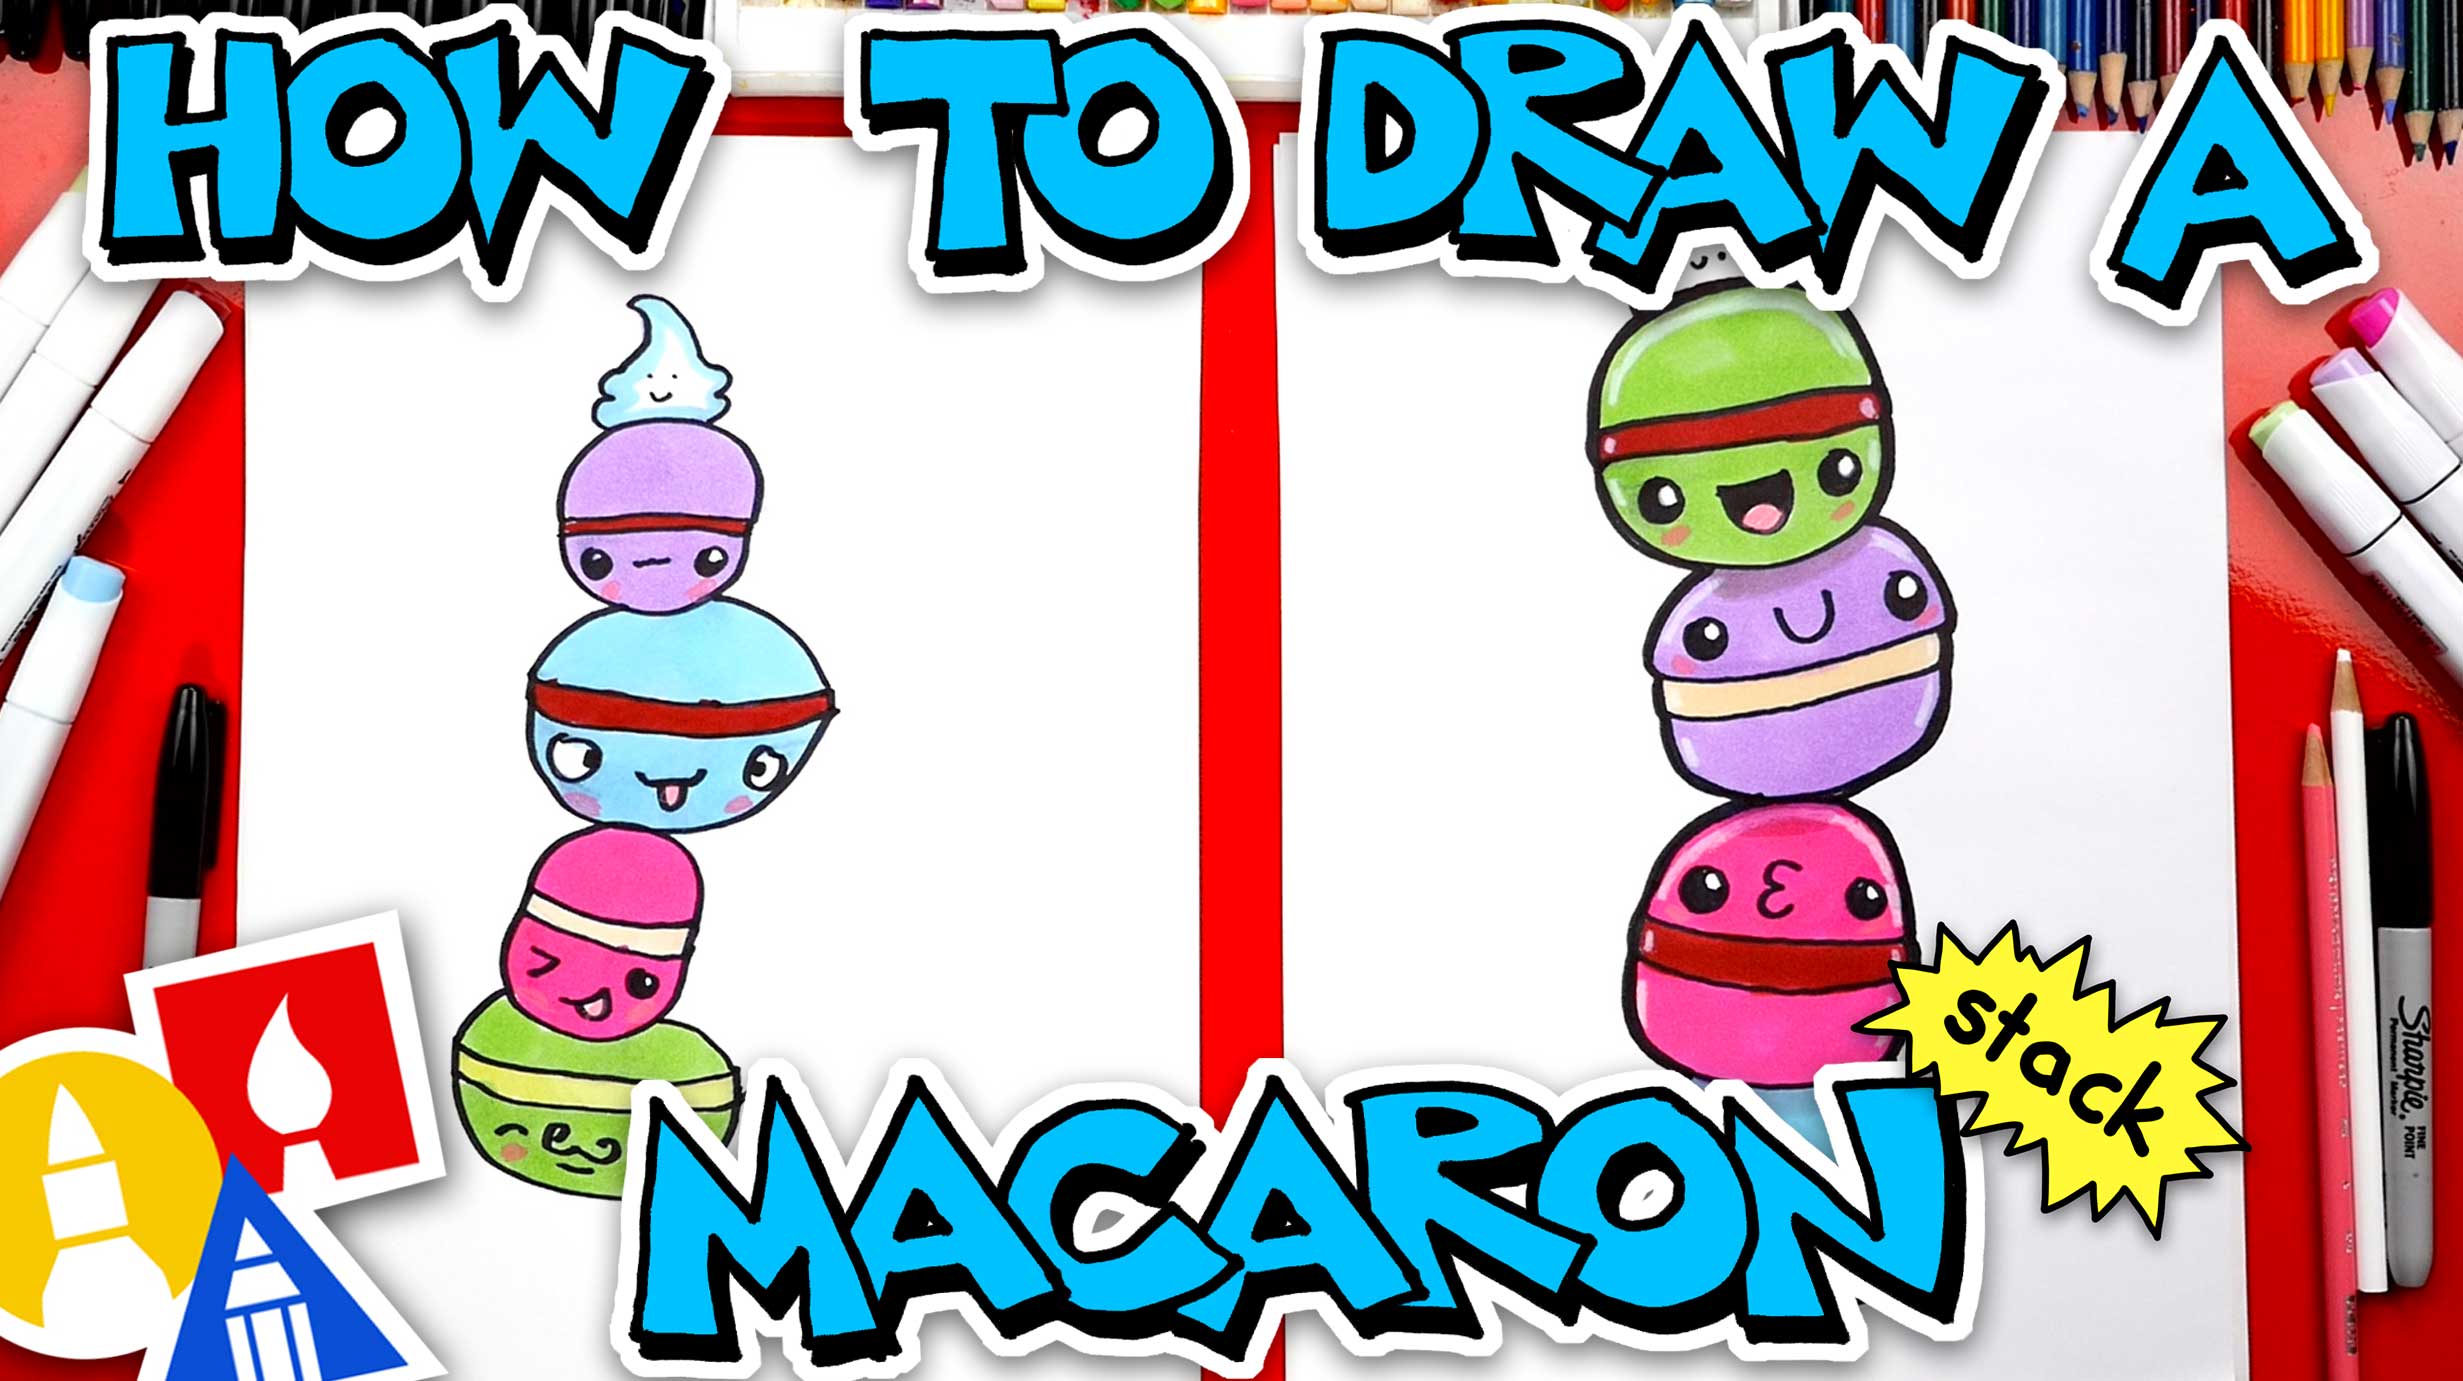 How To Draw A Cute Macaron Stack